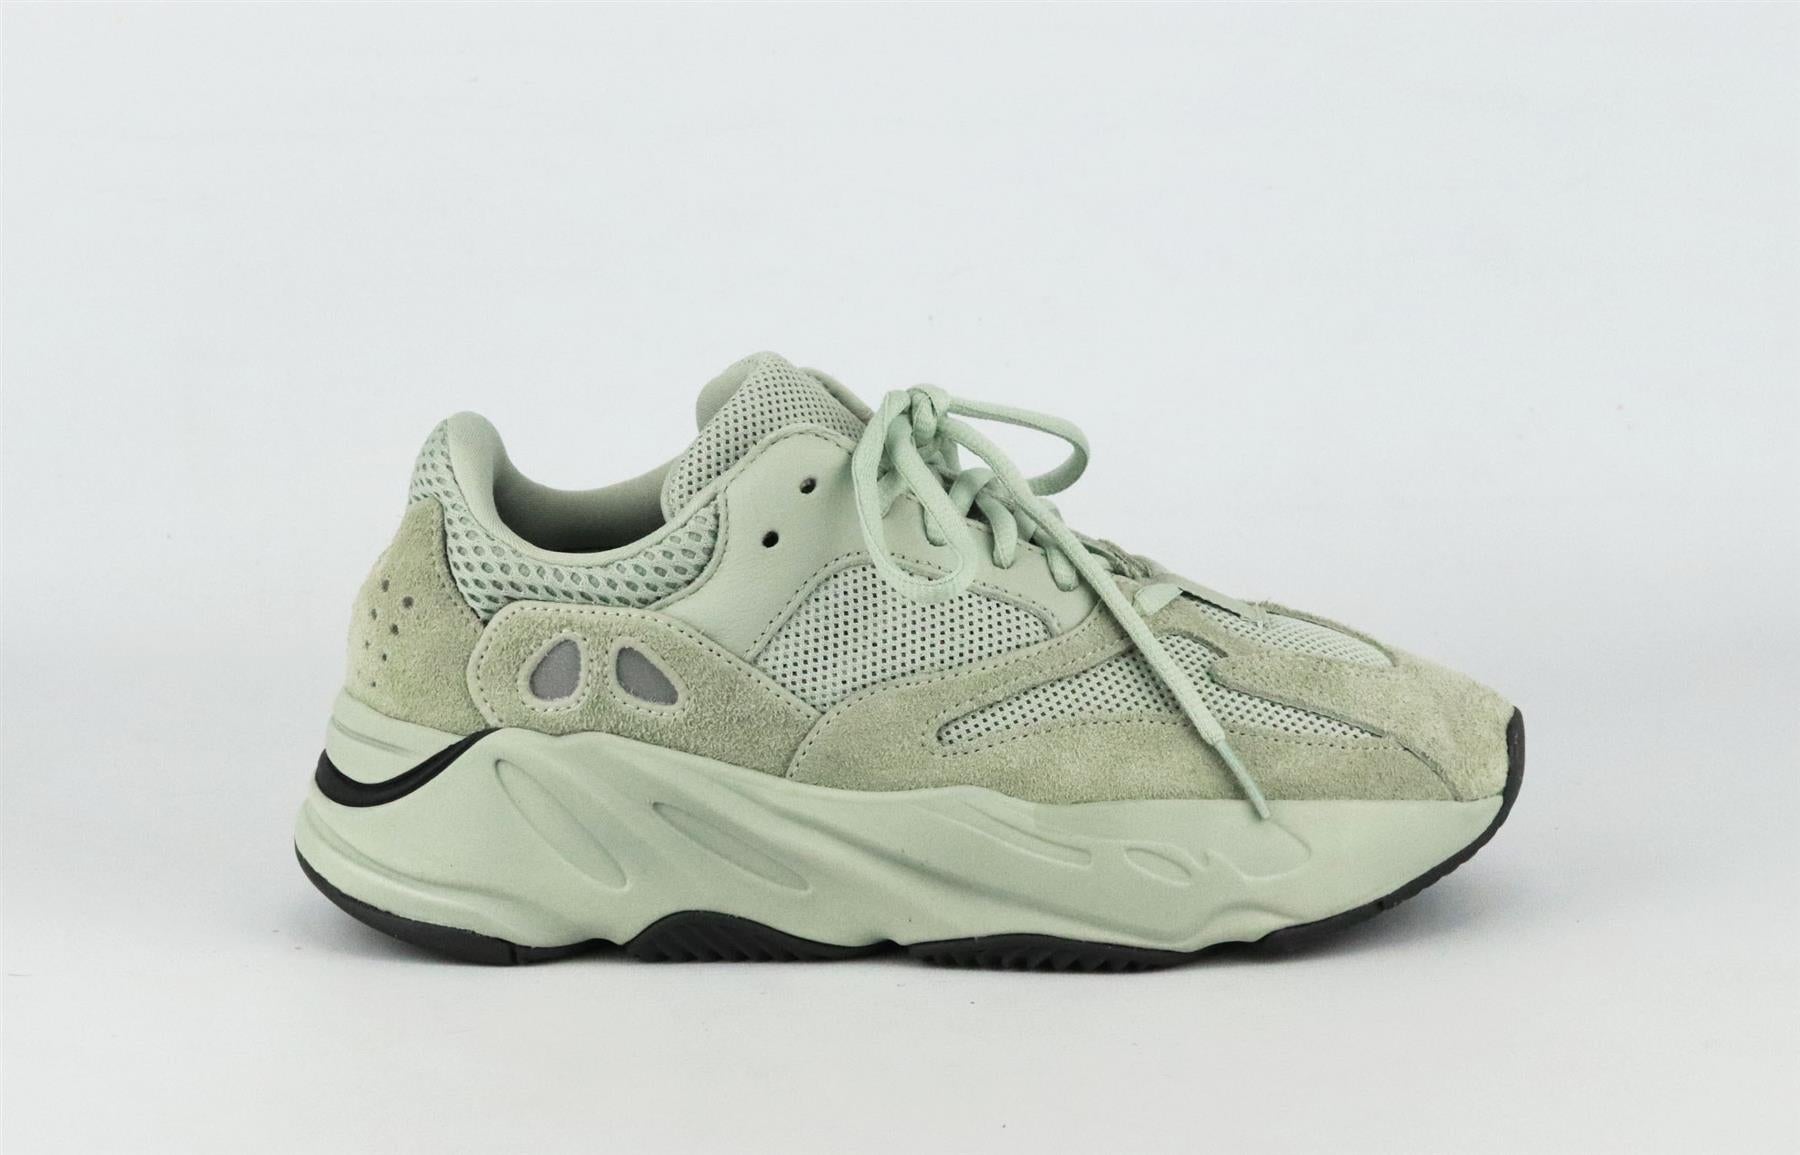 ADIDAS YEEZY BOOST 700 V1 MESH AND SUEDE SNEAKERS EU 39 UK 6 US 6